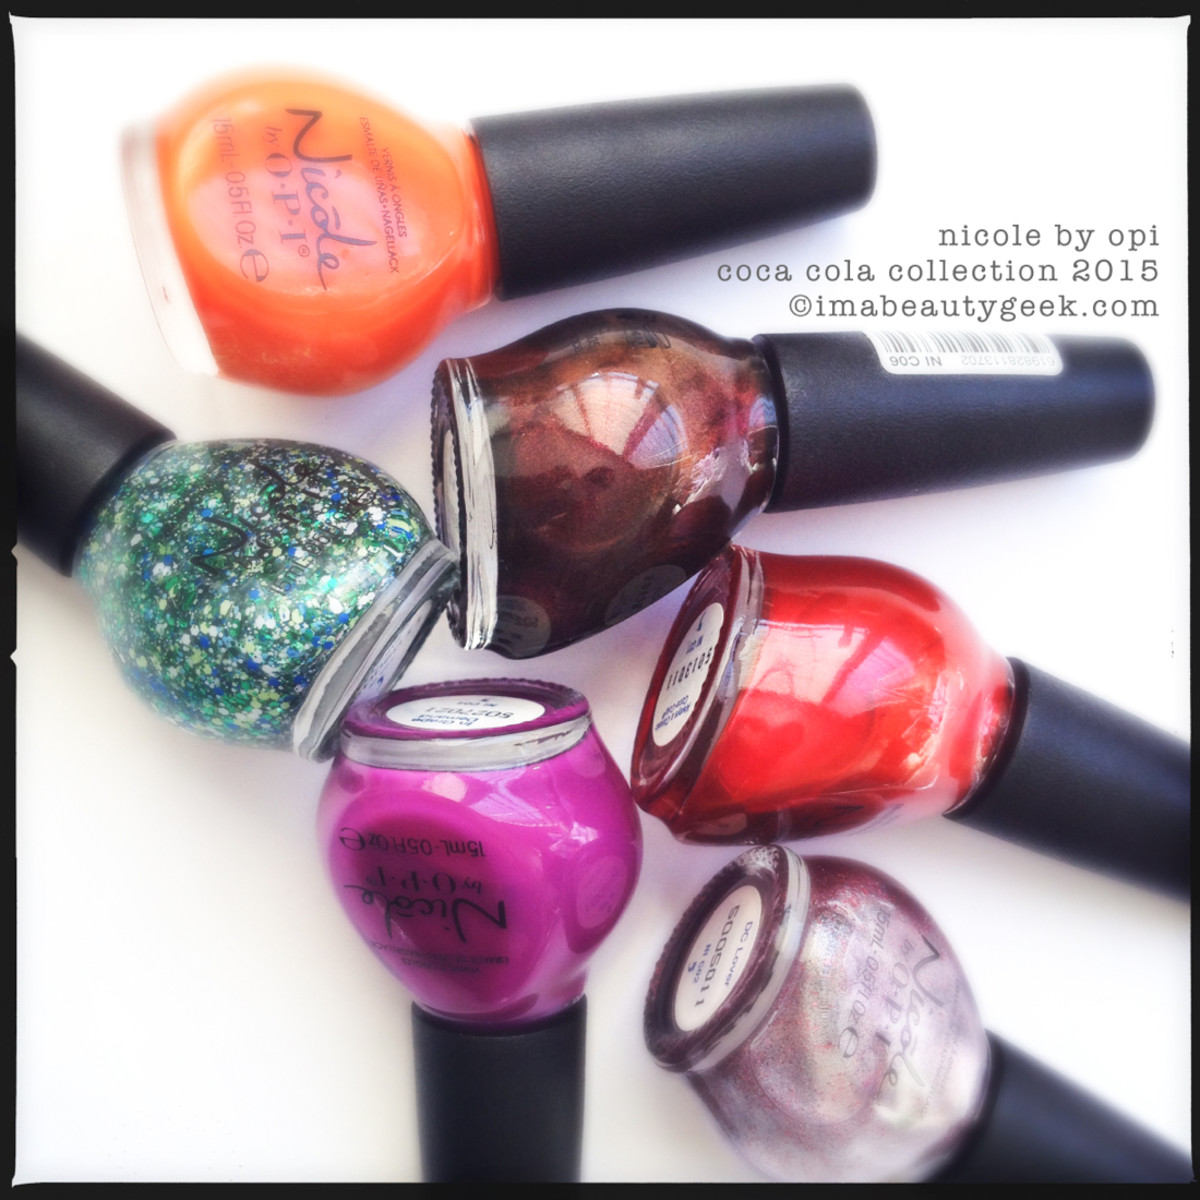 Nicole by OPI Coca Cola Collection 2015 Swatches by ManiGeek